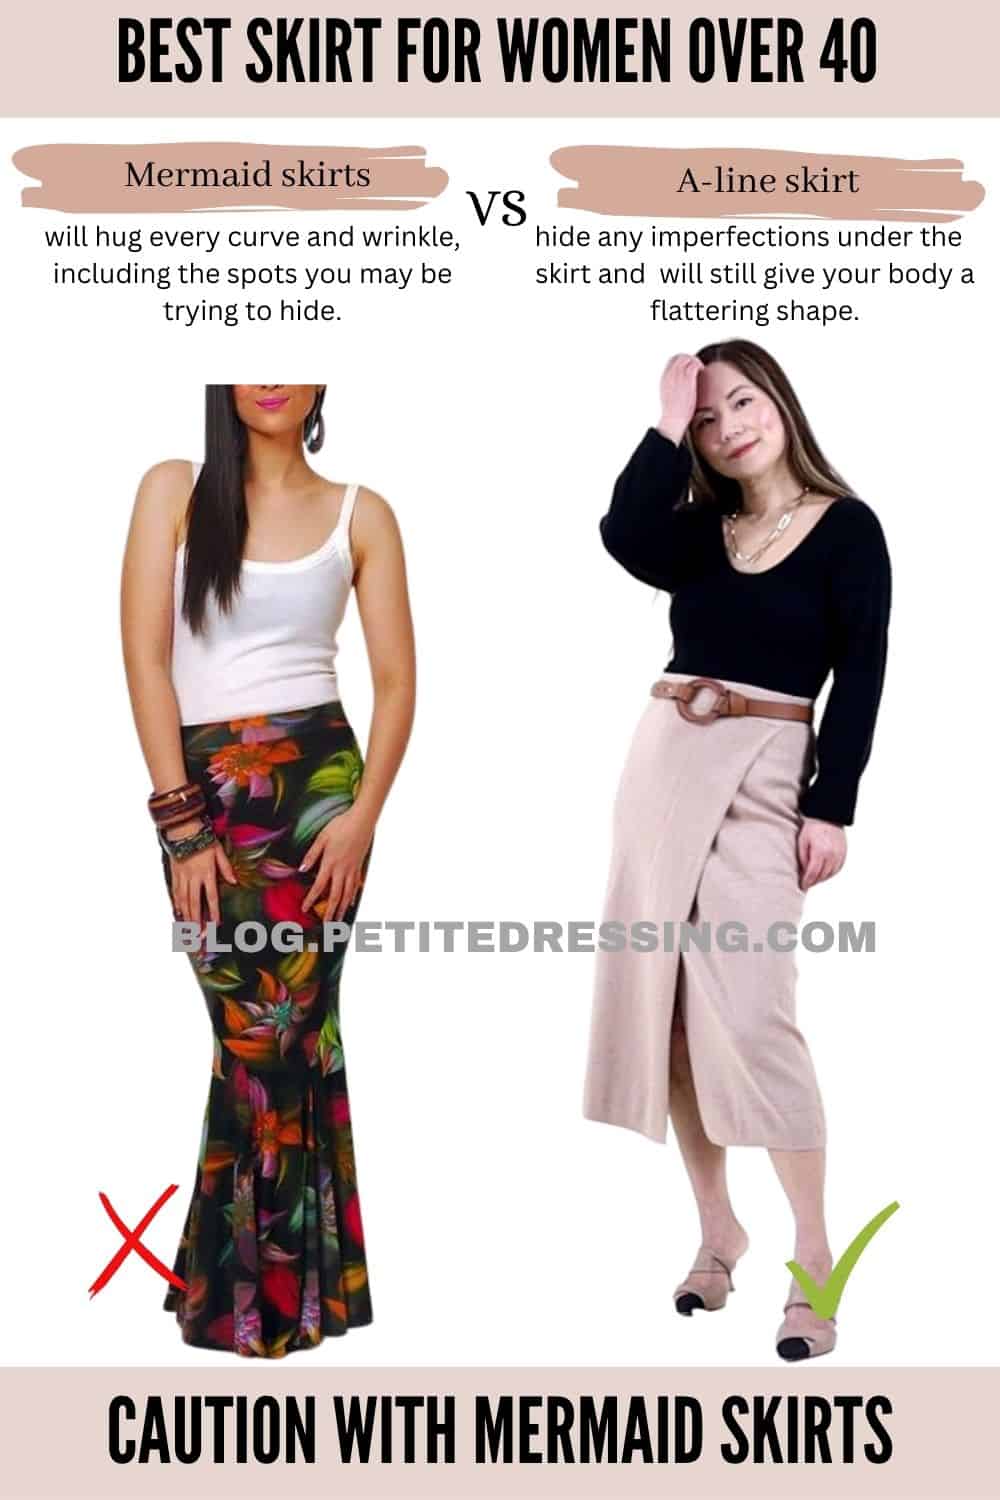 The Skirt Guide for Women Over 40-Caution with mermaid skirts